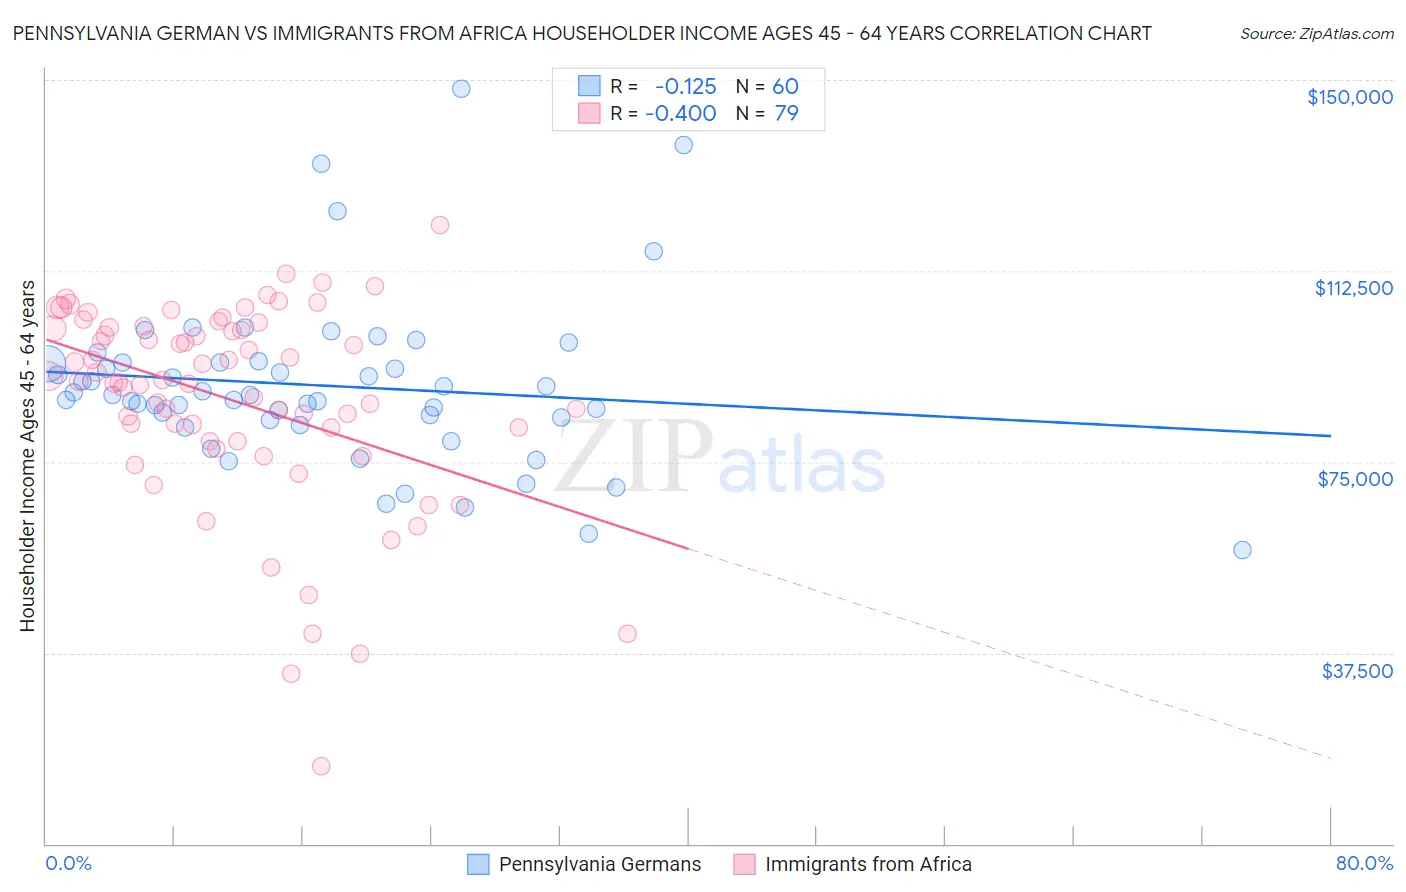 Pennsylvania German vs Immigrants from Africa Householder Income Ages 45 - 64 years